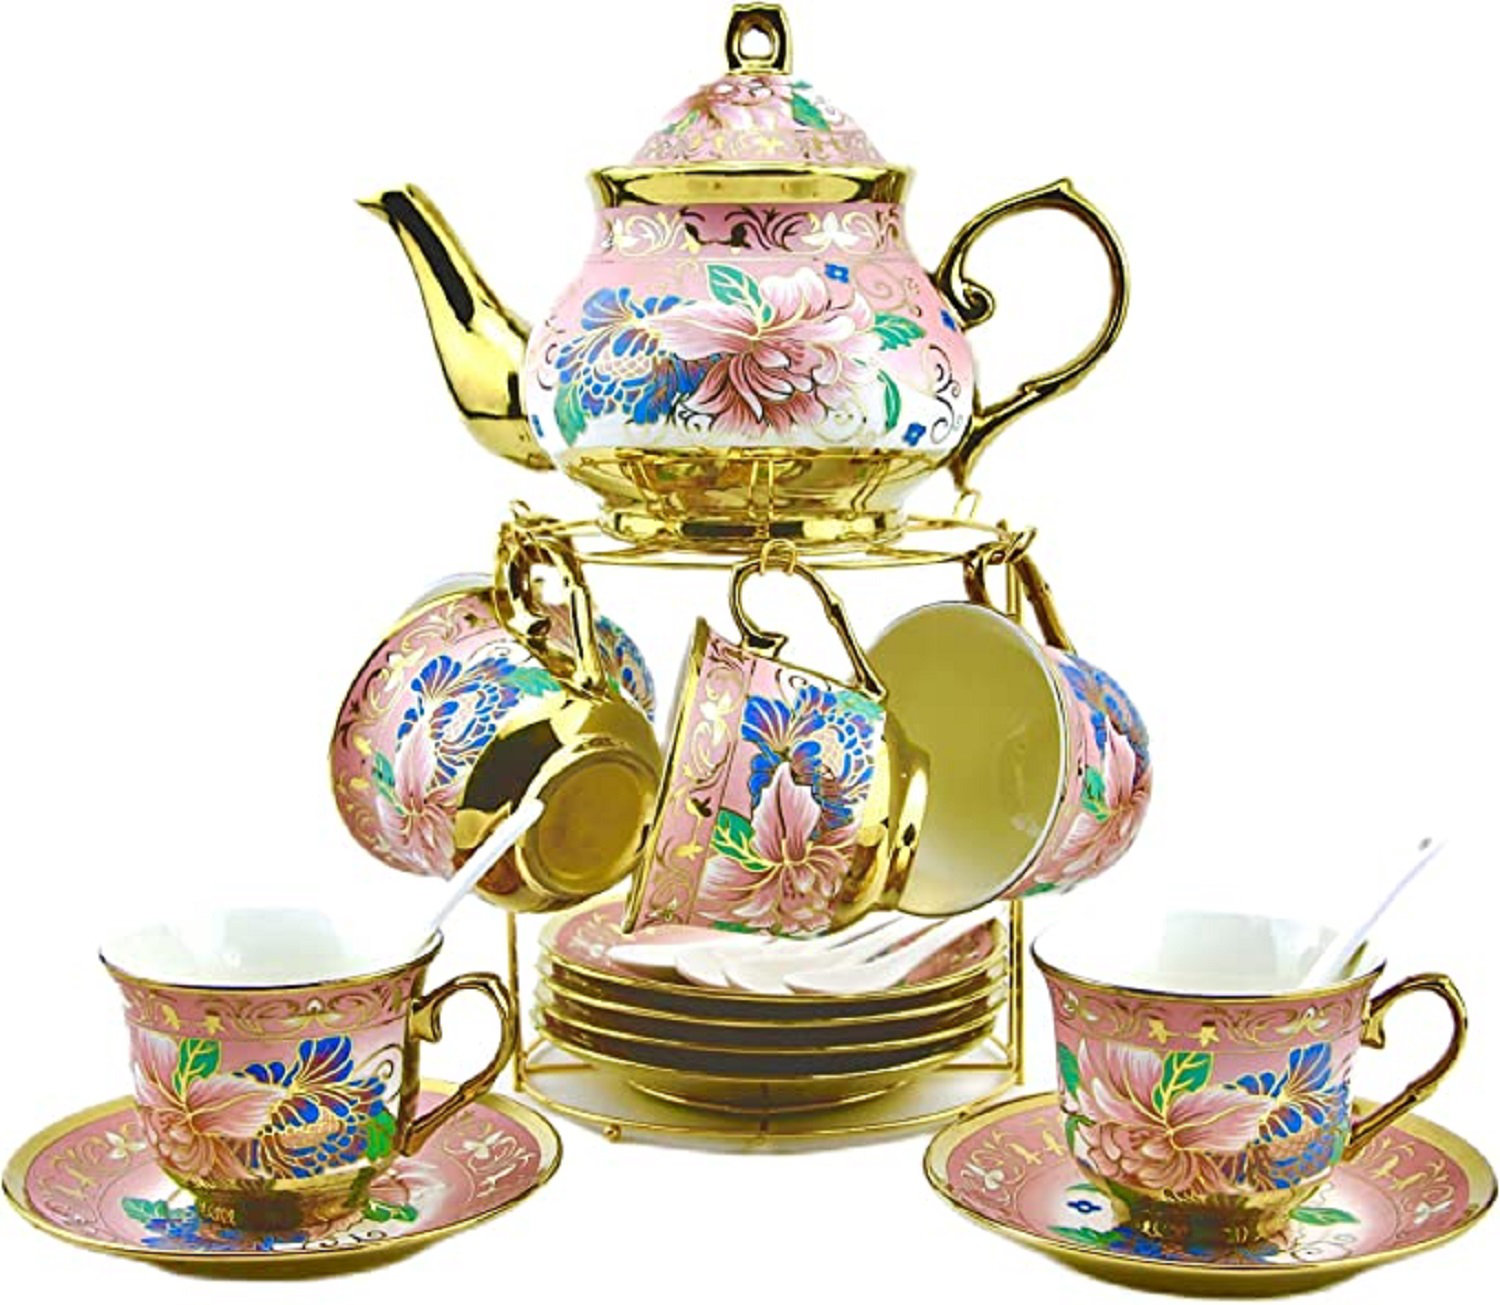 xixi-home Glass Tea Set,Red Rose Teapot Set,Flower Teapot and  Cup Set 7-piece set Thickened Clear Tea Kettle coffee cup set fashion  ladies Fancy Tea Set,Mother's Day gift-exquisite gift box: Tea